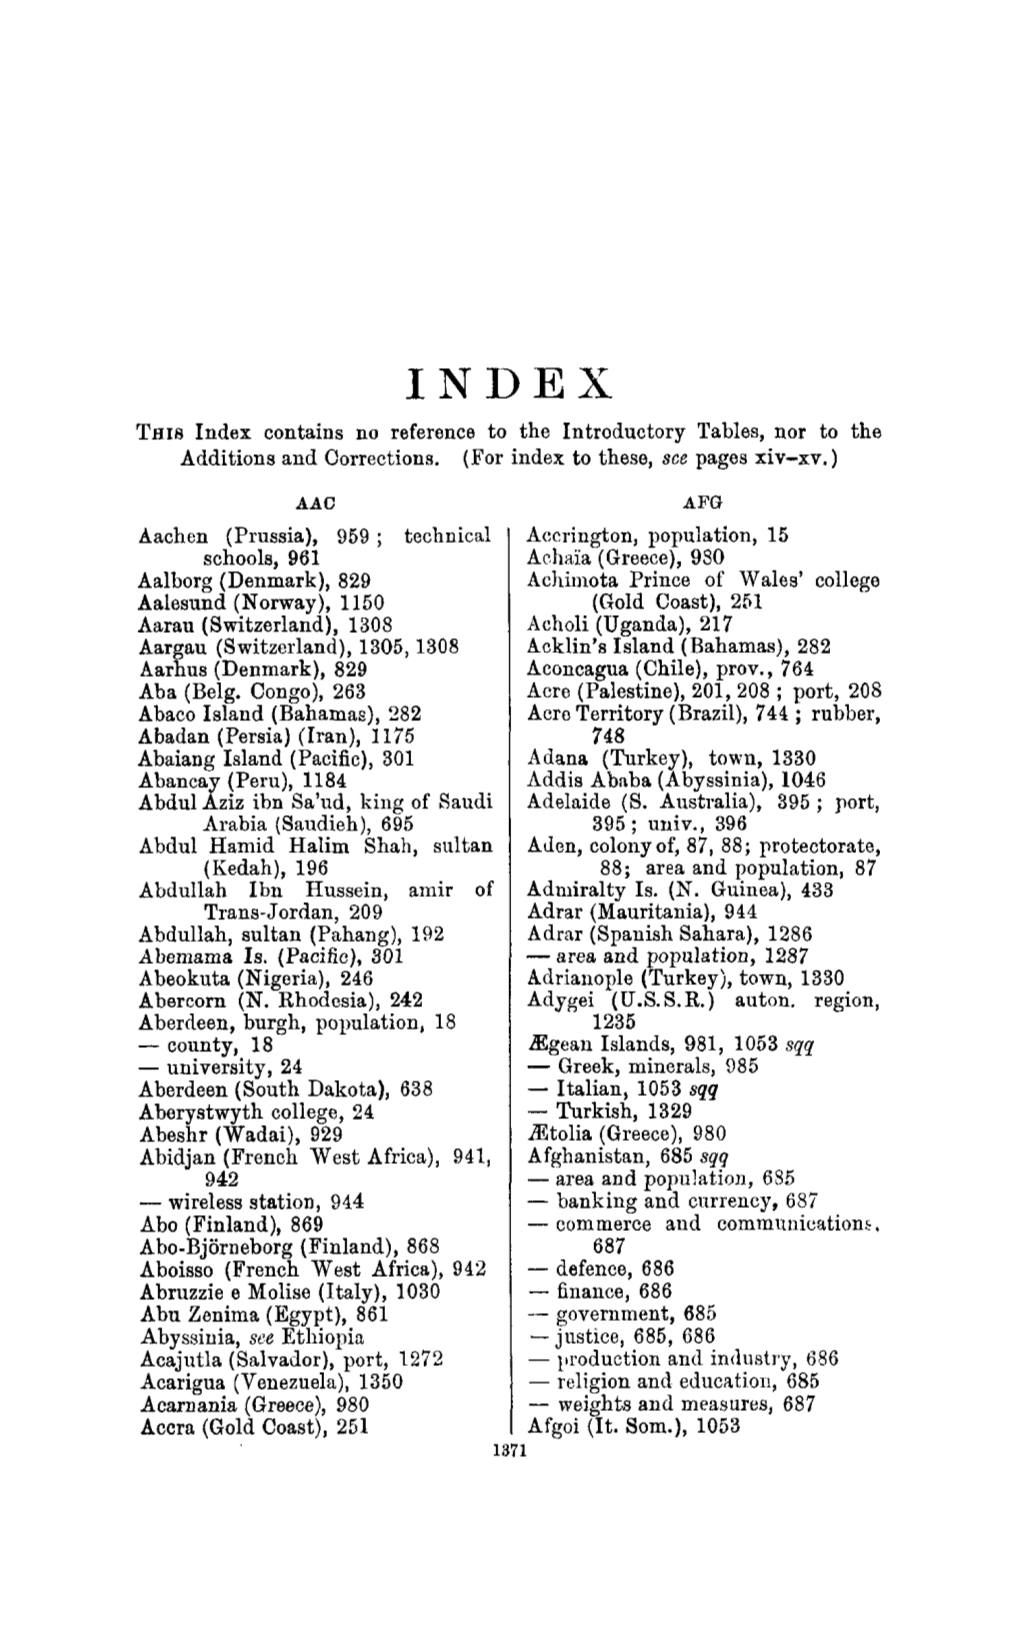 THIS Index Contains No Reference to the Introductory Tables, Nor to the Additions and Corrections. (For Index to These, See Pages Xiv-Xv.)